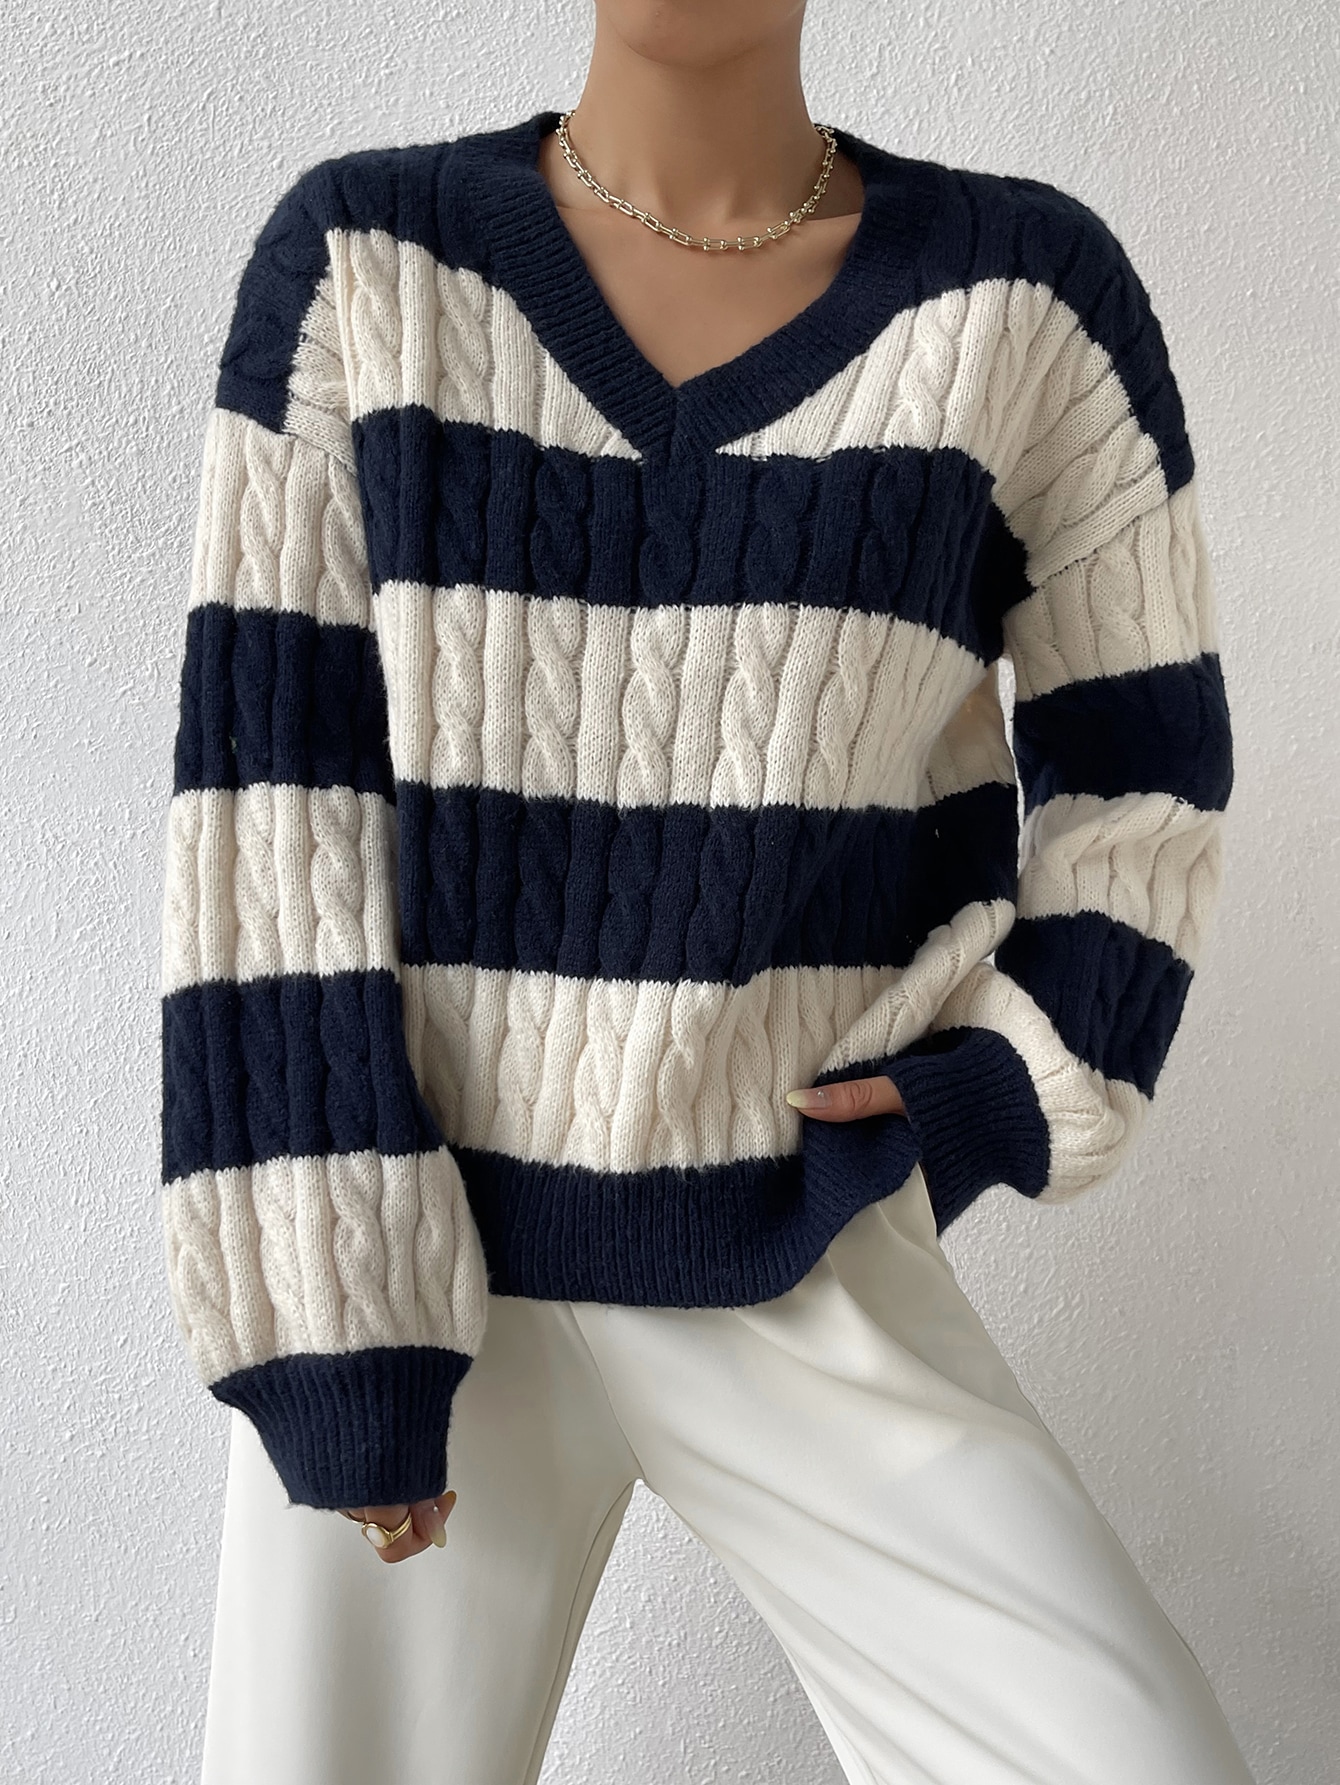 SHEINFrenchyTwoToneCableKnitDropShoulderSweater_SHEINUSA-新建文件夹-166020711378c58d7057d7a14e91ce2b91171685ad